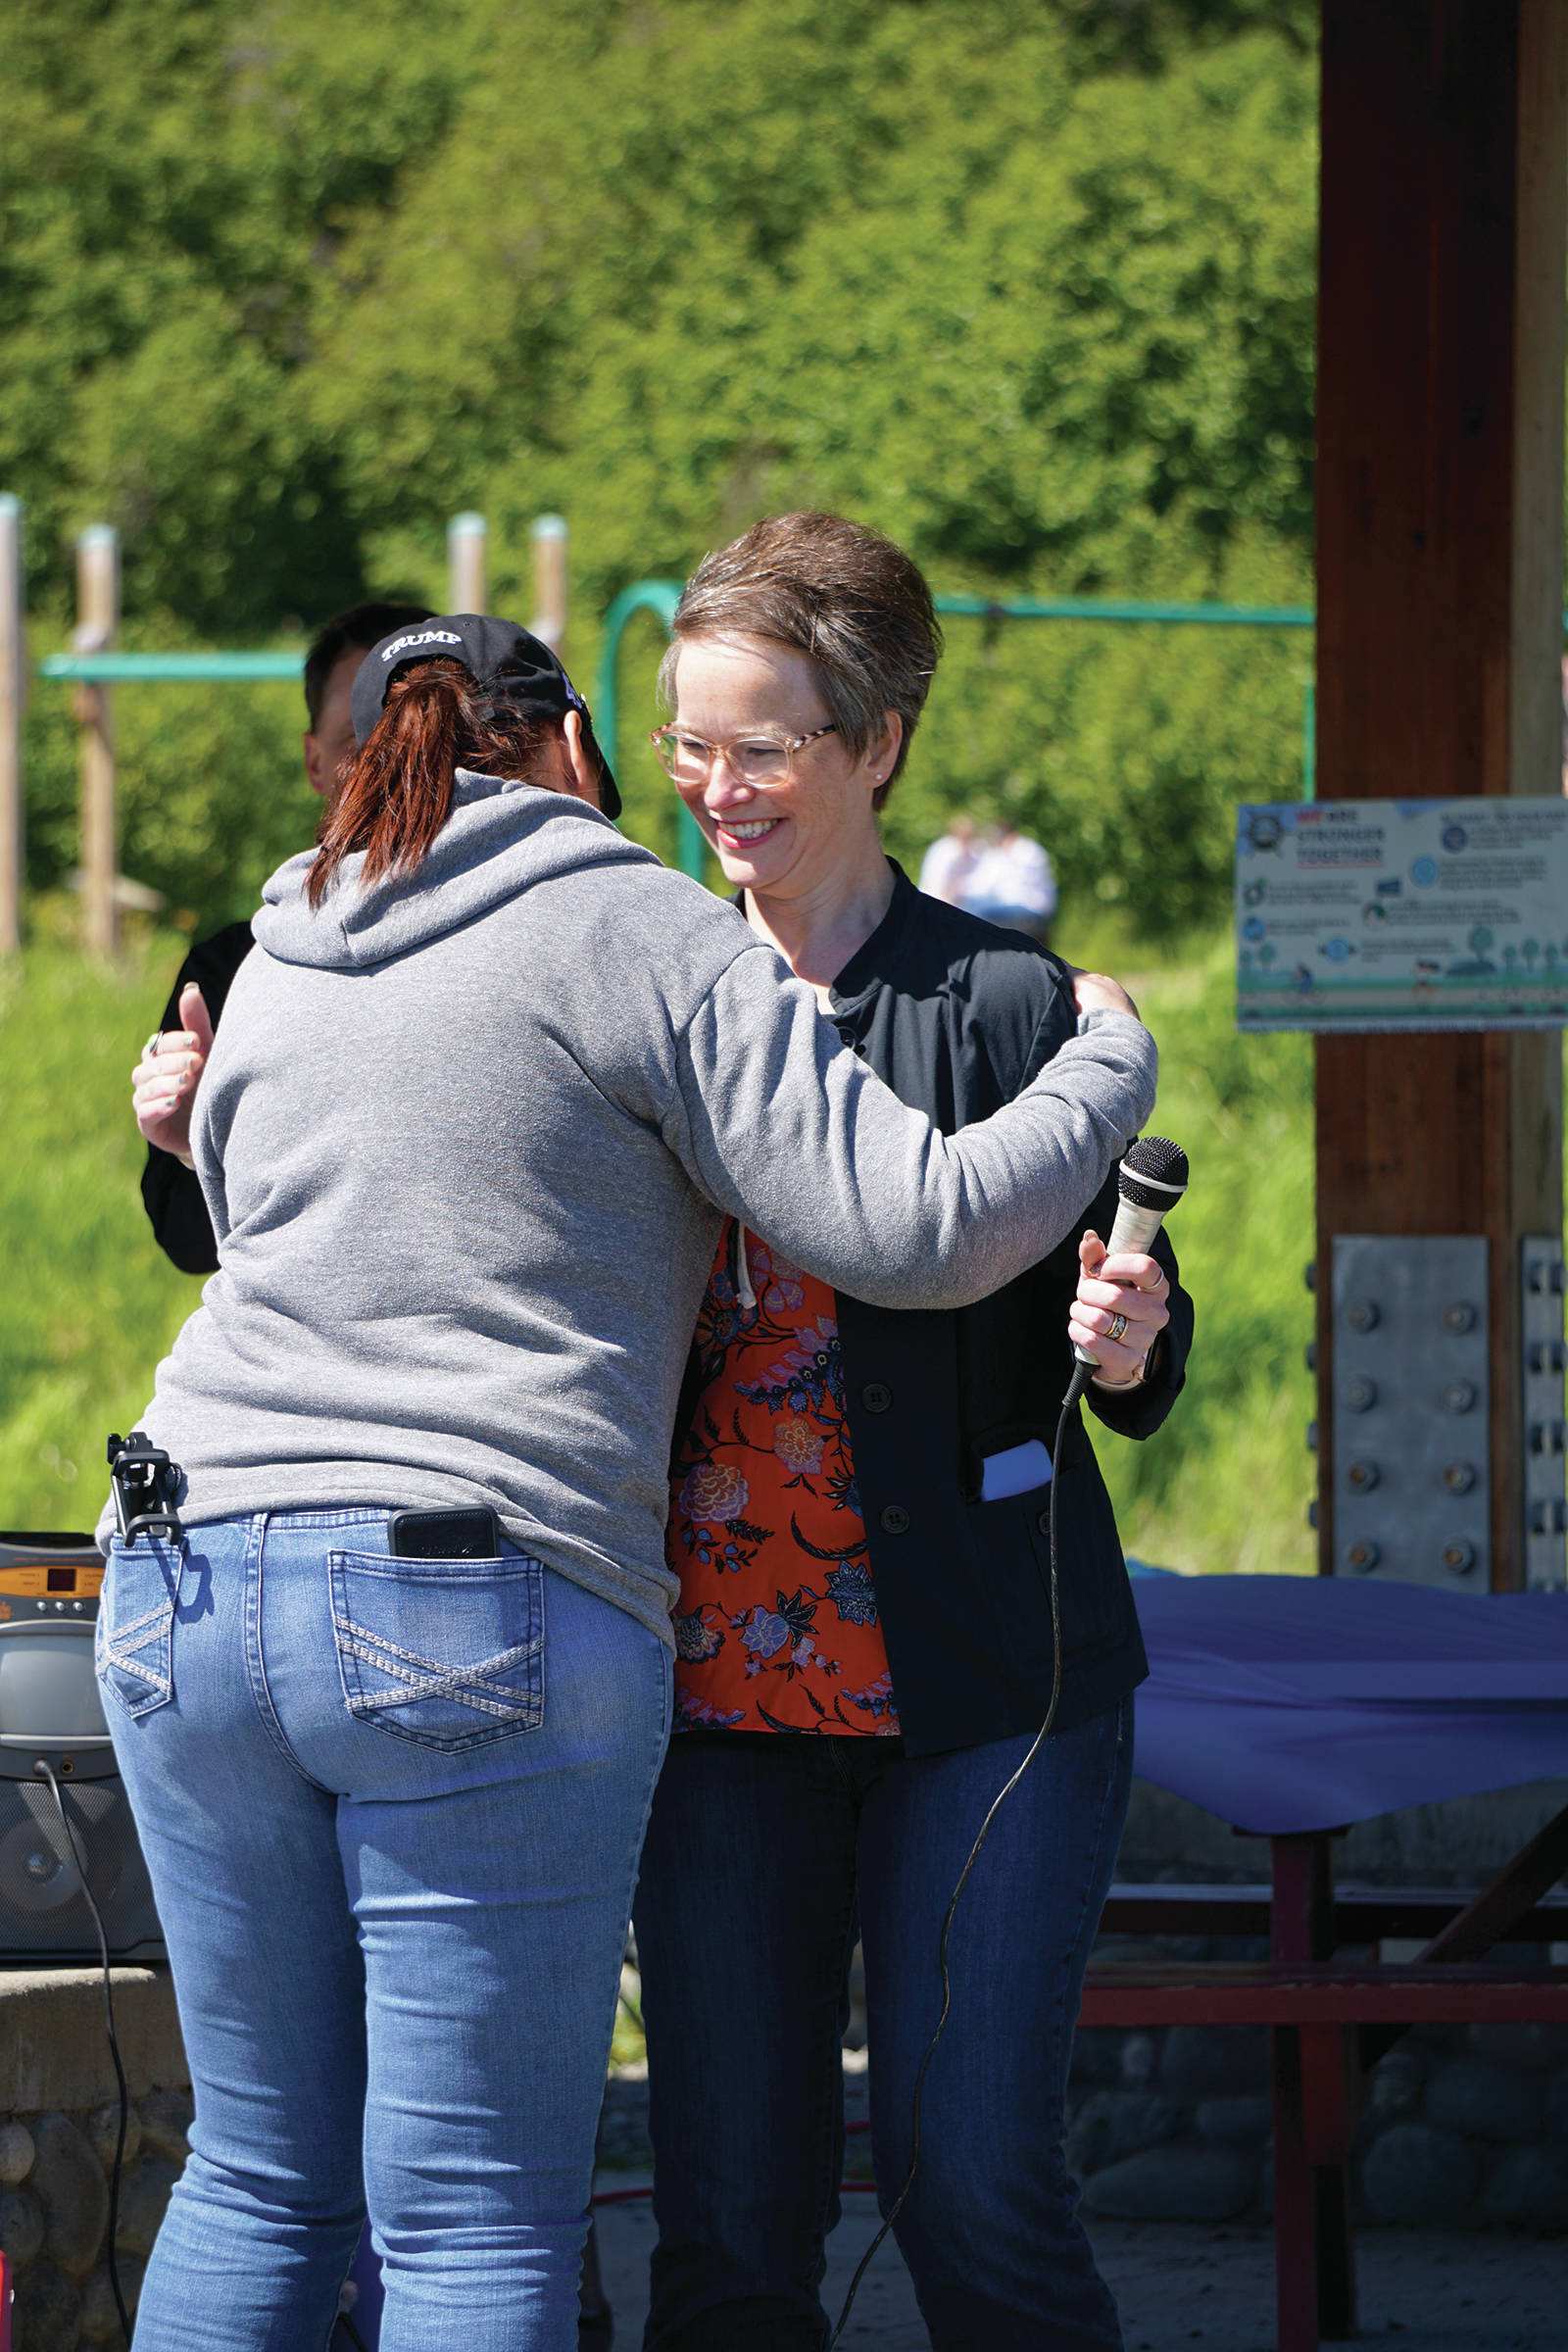 Cassie Lawver, left, hugs Rep. Sarah Vance, R-Homer, after Lawver introduced her at a kickoff for Vance’s re-election campaign on Sunday, June 14, 2020, at Karen Hornaday Park in Homer, Alaska. (Photo by Michael Armstrong/Homer News)